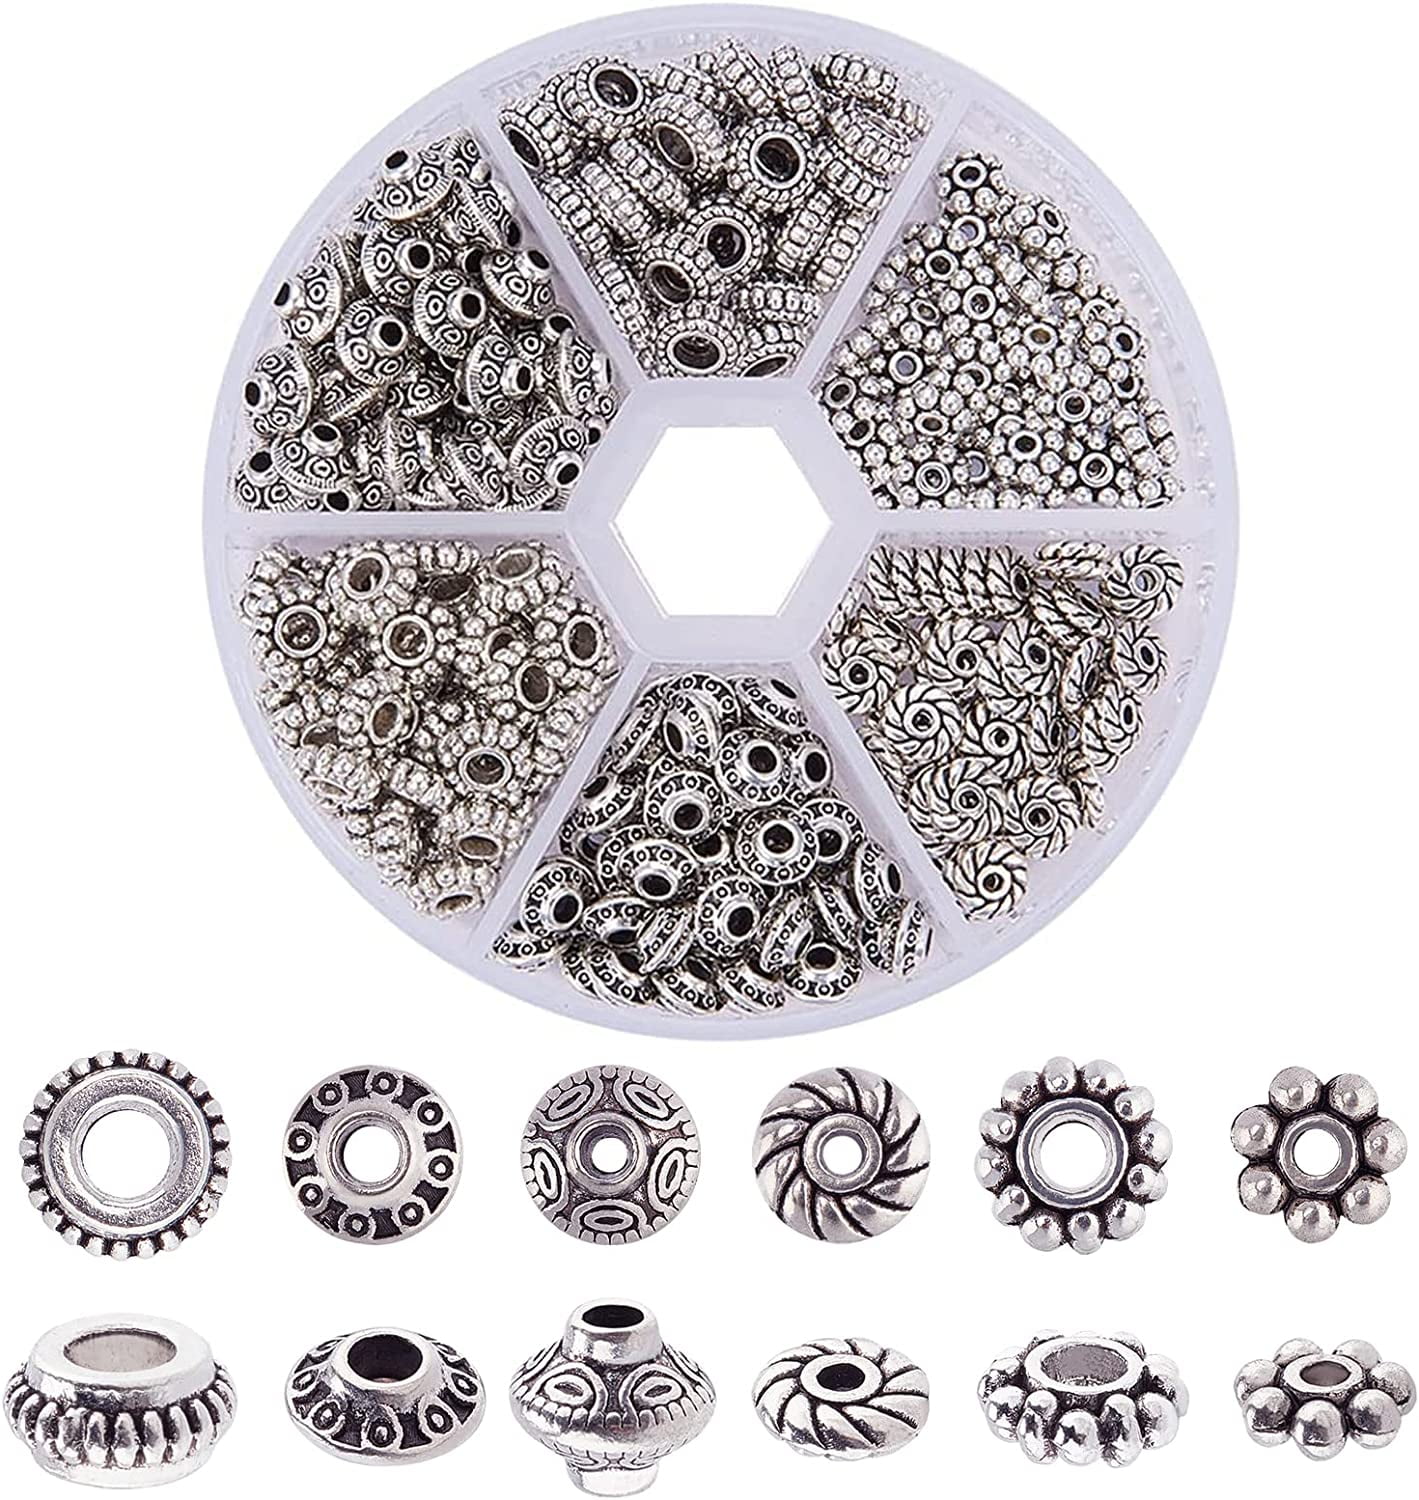 Textured Metal Large Hole Spacer Beads in 4 Styles in Antique Silver Tone  115 Pieces Total - JLW11737